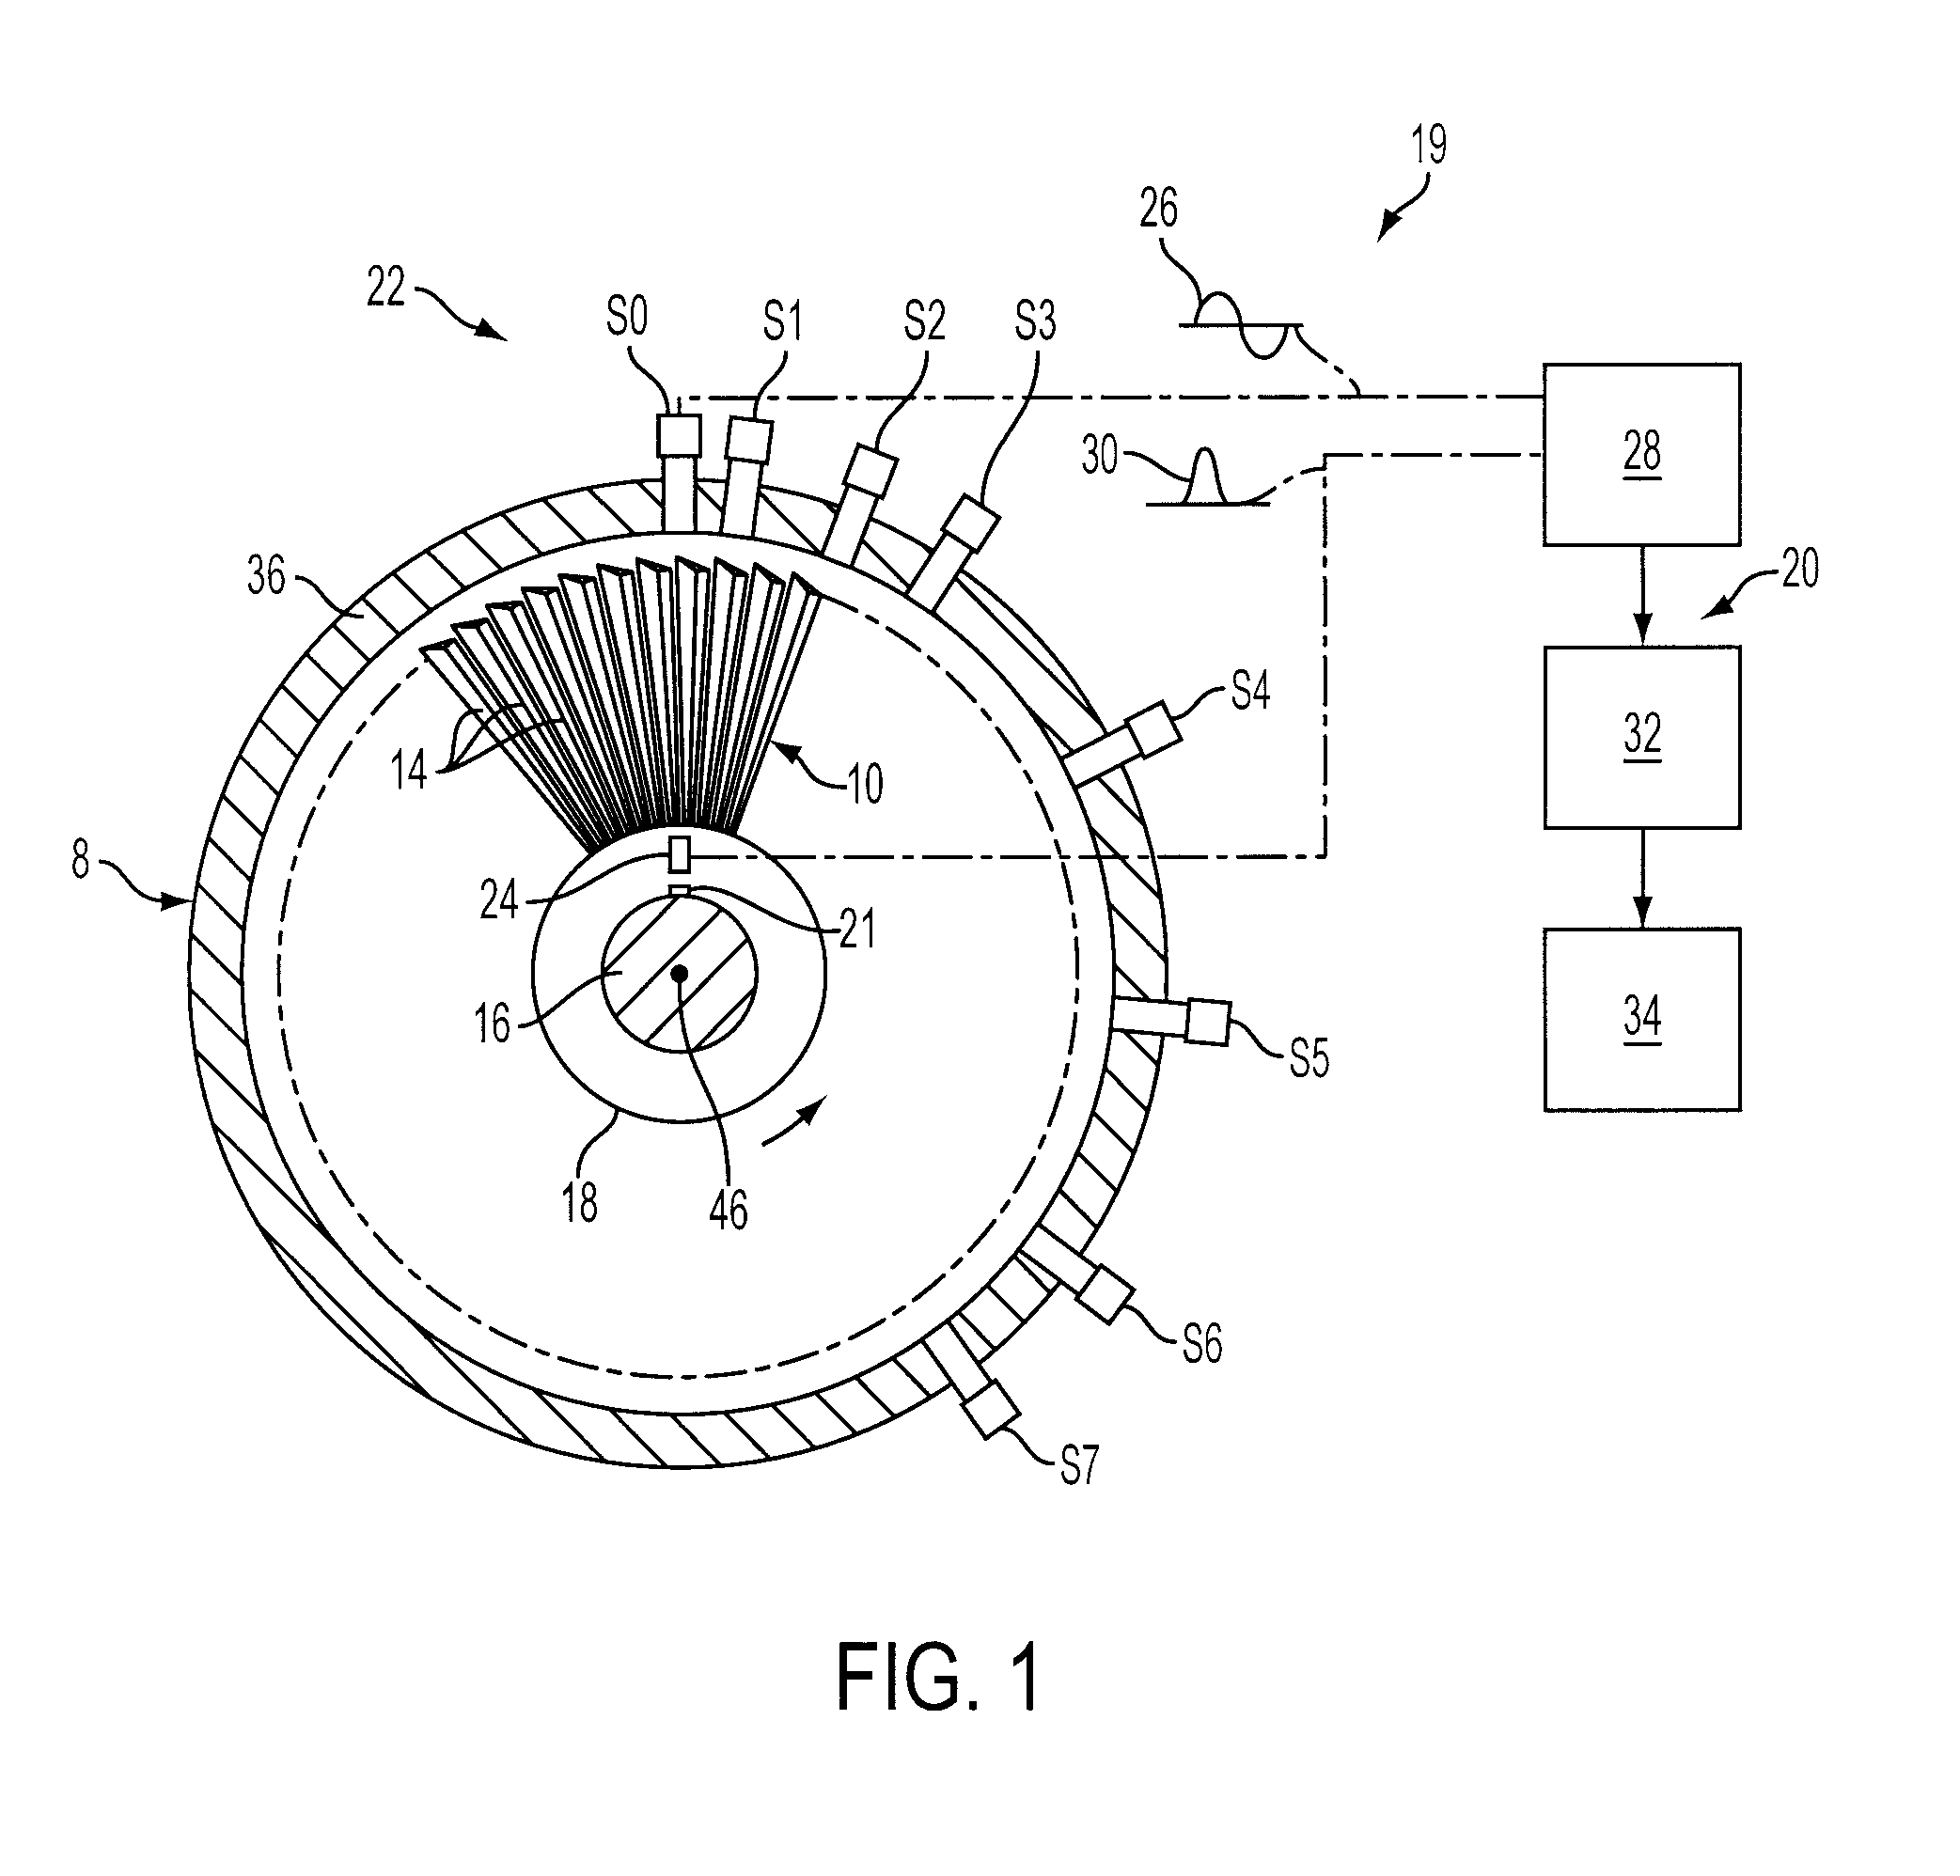 Method of Analyzing Non-Synchronous Vibrations Using a Dispersed Array Multi-Probe Machine